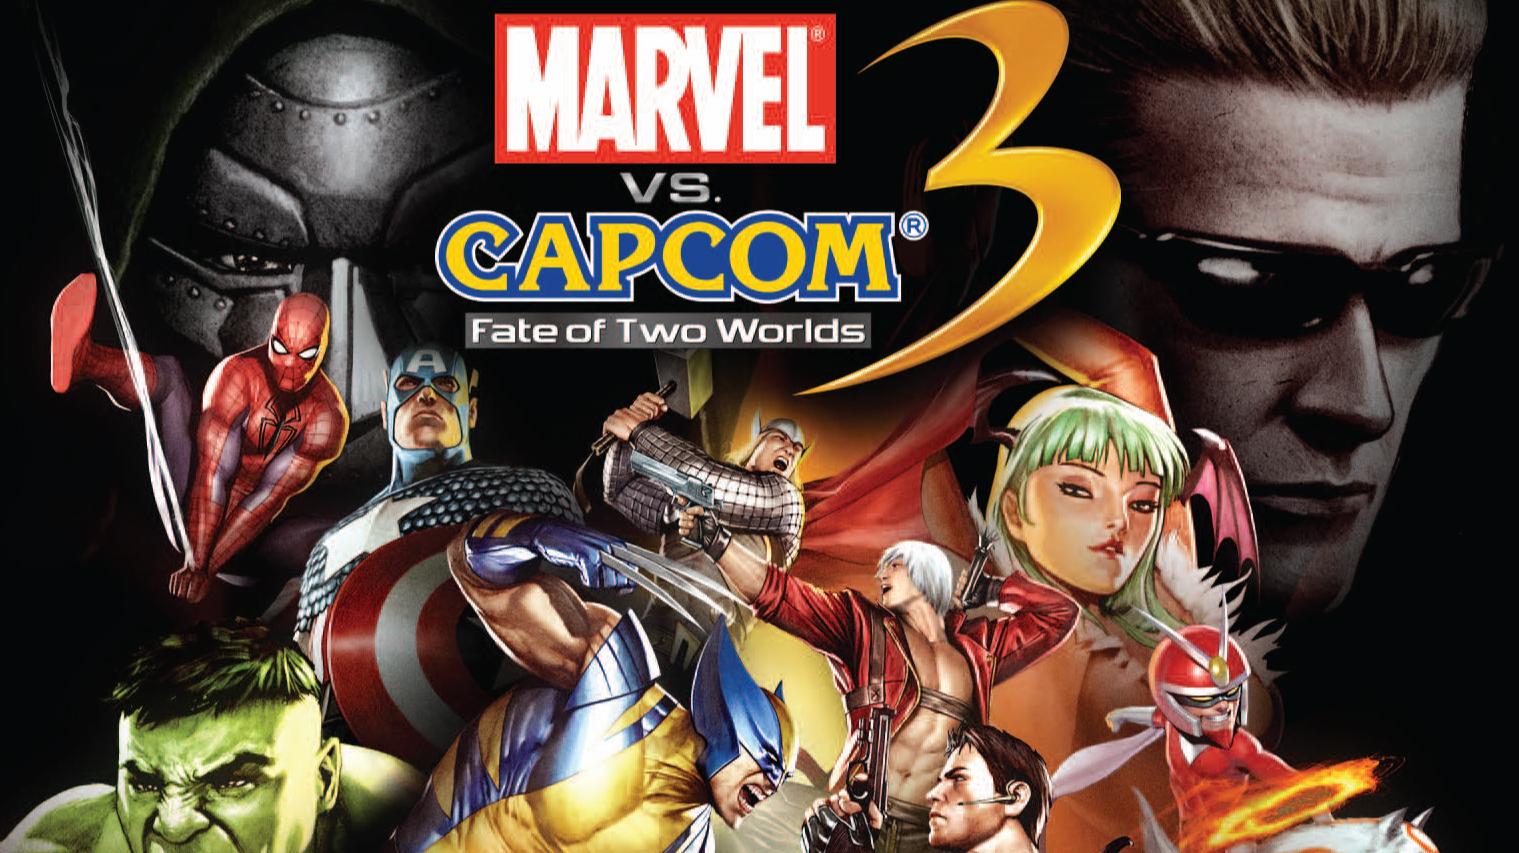 Marvel Vs. Capcom 3: Fate Of Two Worlds #25